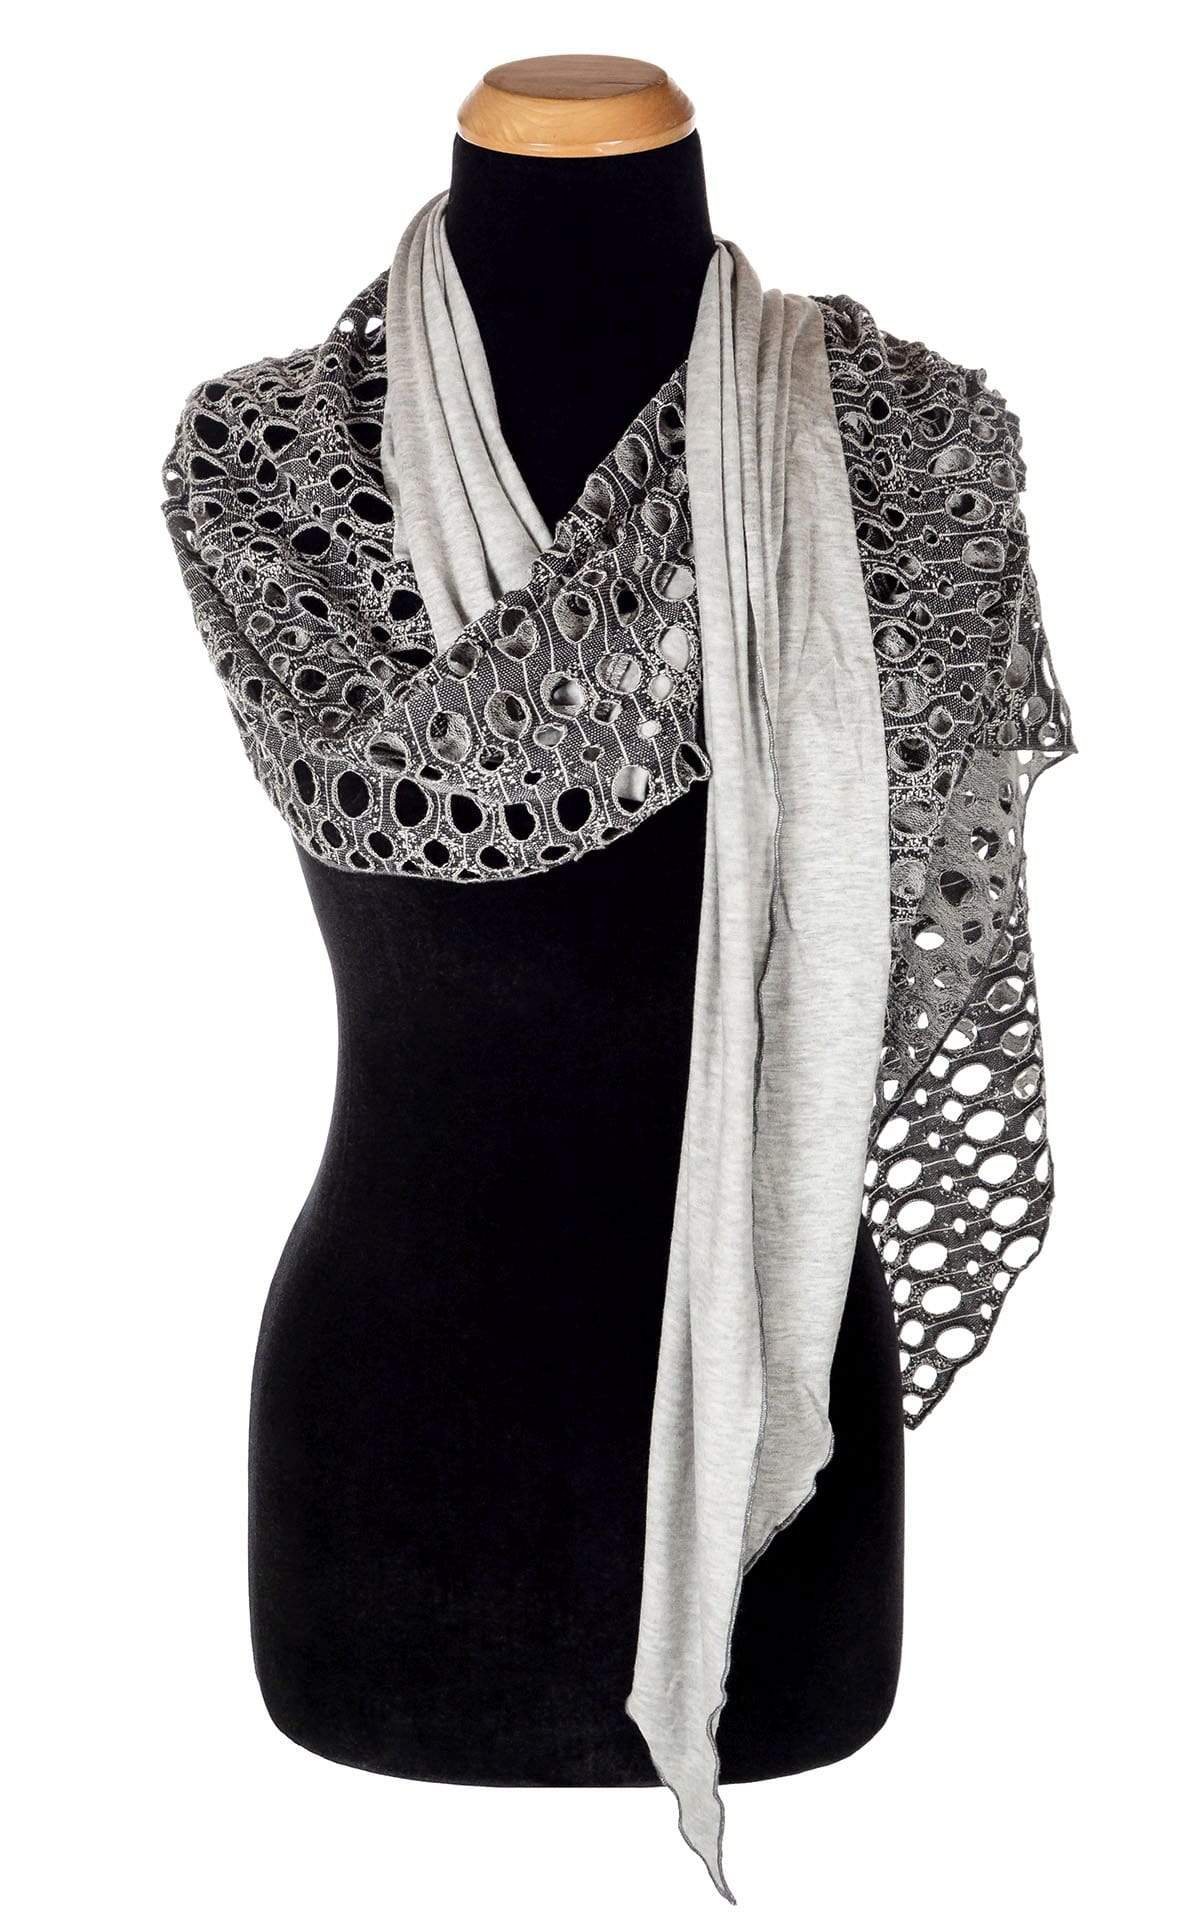 Woman&#39;s Two-Tone Handkerchief Scarf on Mannequin | Lunar Landing, a black and neutral knit with curled edges surrounding holes, paired with a light-weight Silver Gray Jersey Knit | Handmade in Seattle WA | Pandemonium Millinery